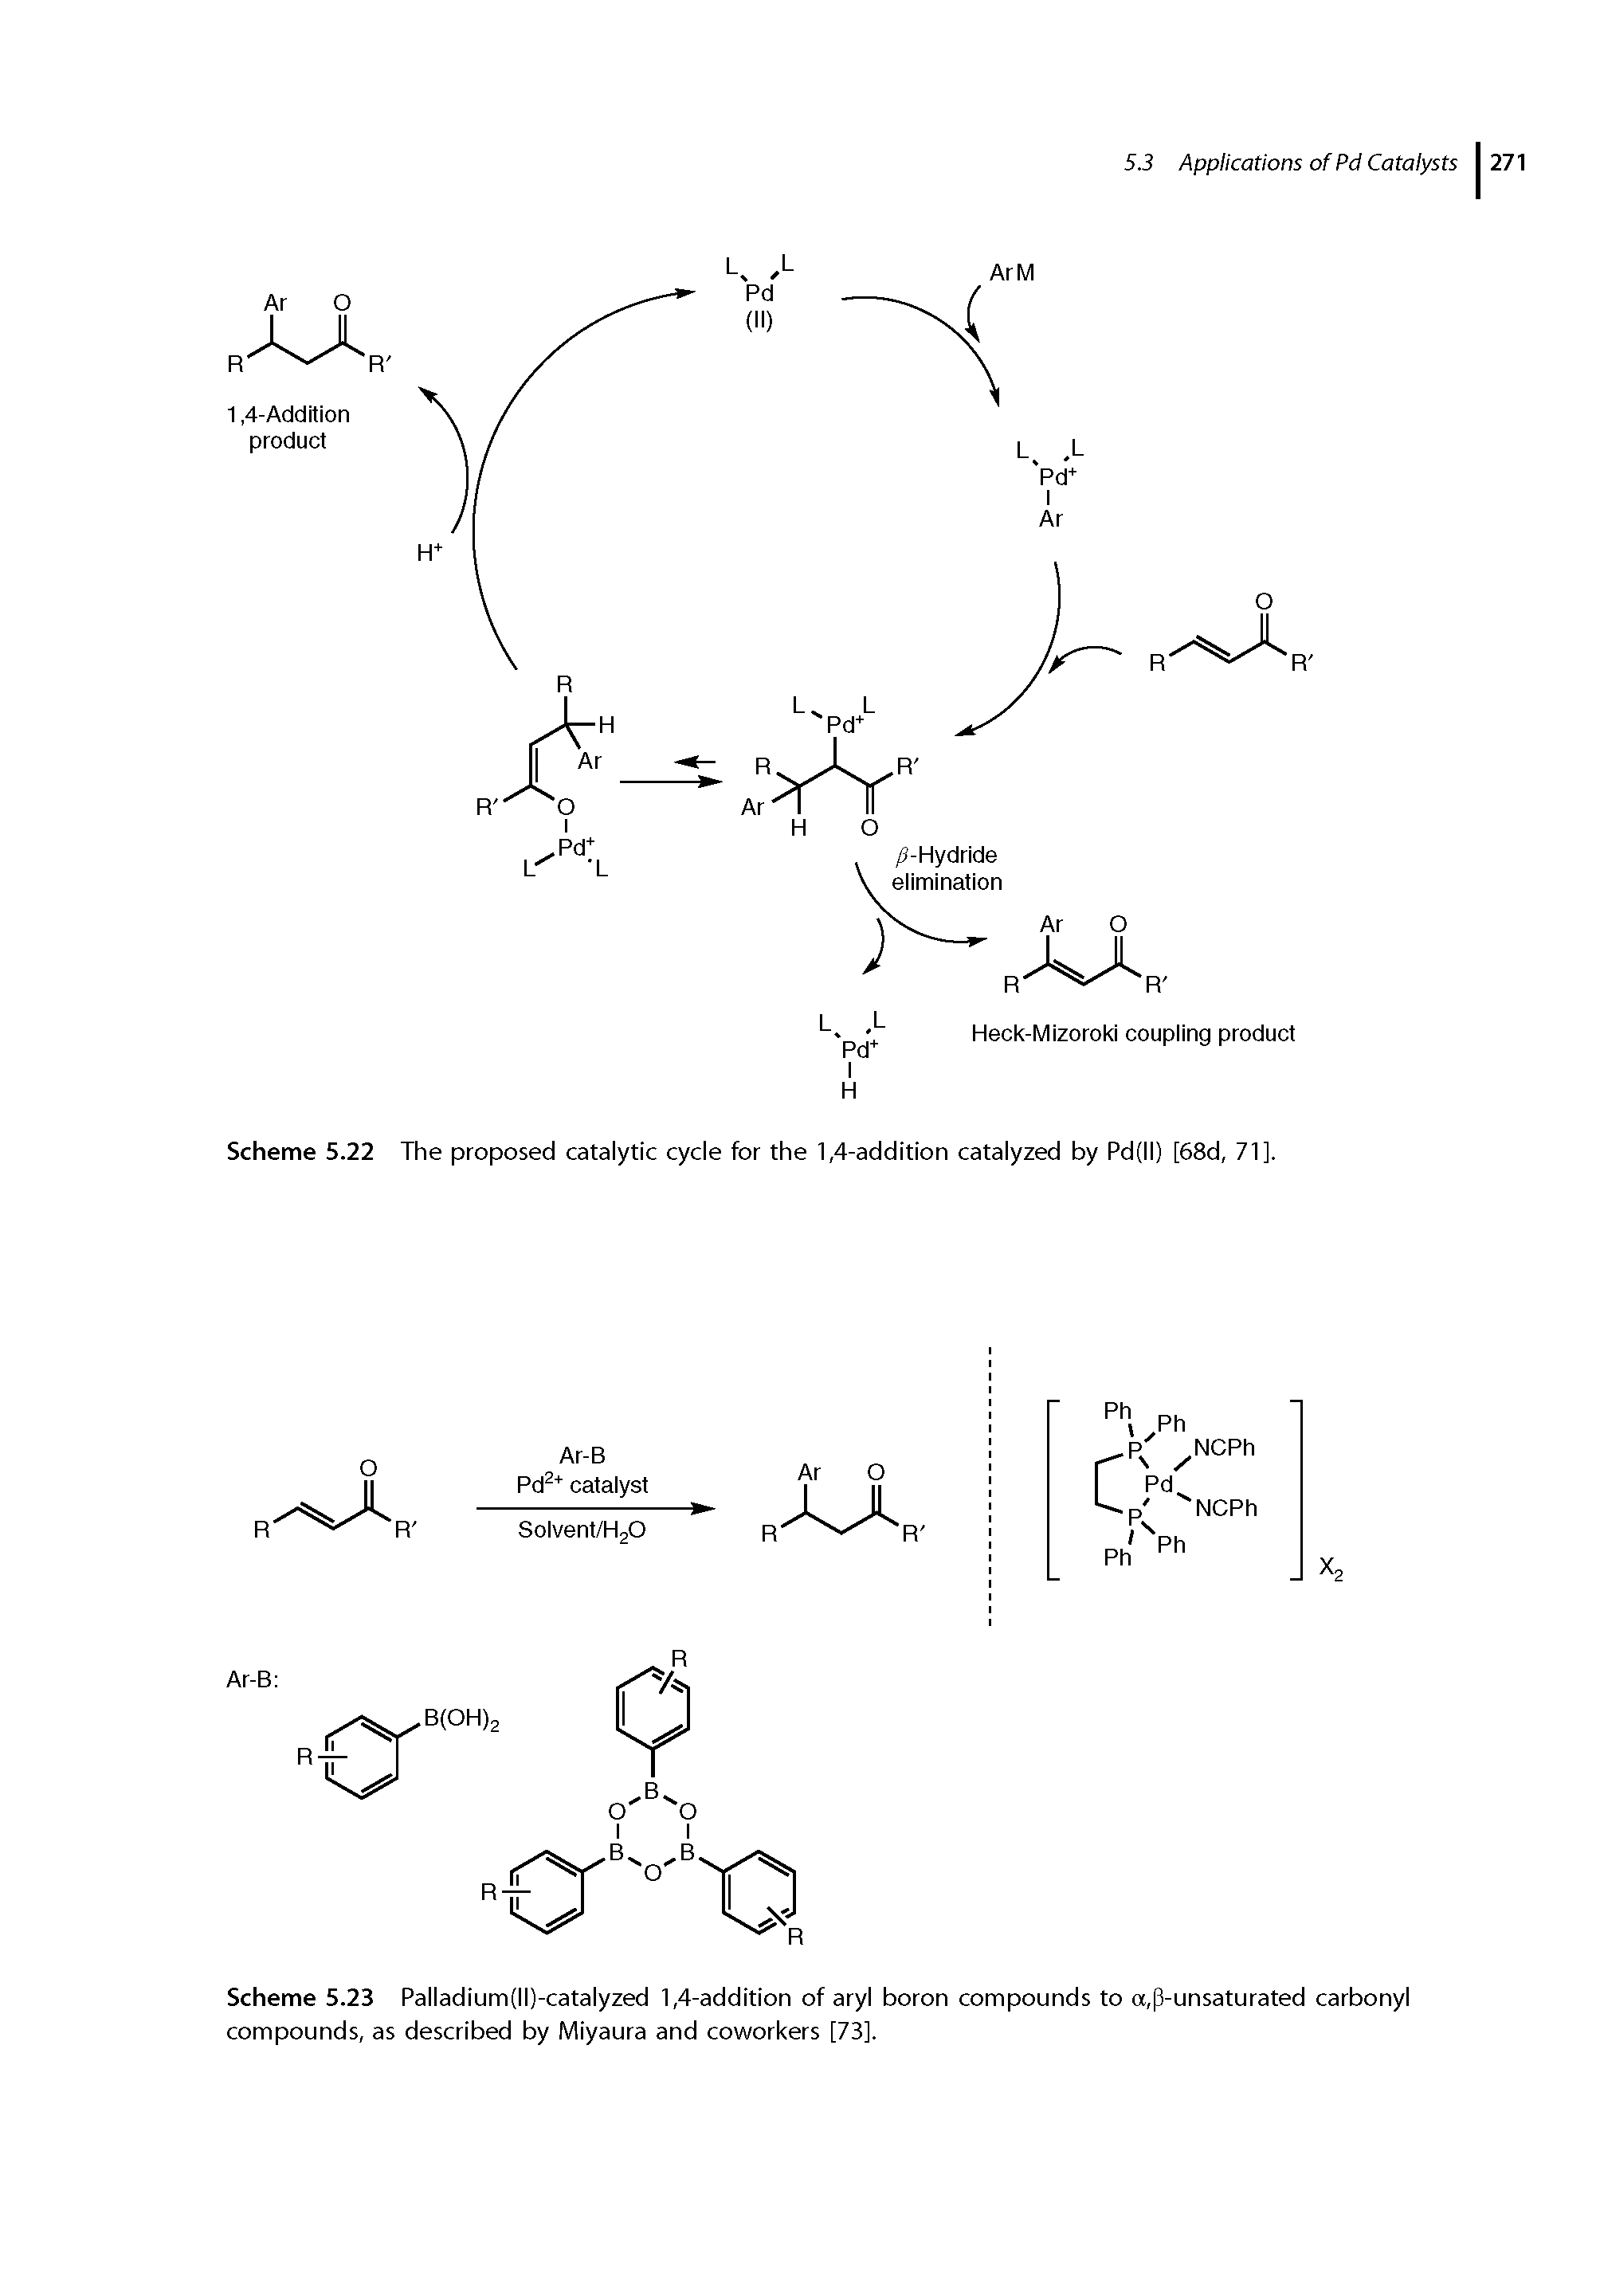 Scheme 5.23 Palladium(ll)-catalyzed 1,4-addition of aryl boron compounds to a,p-unsaturated carbonyl compounds, as described by Miyaura and coworkers [73].